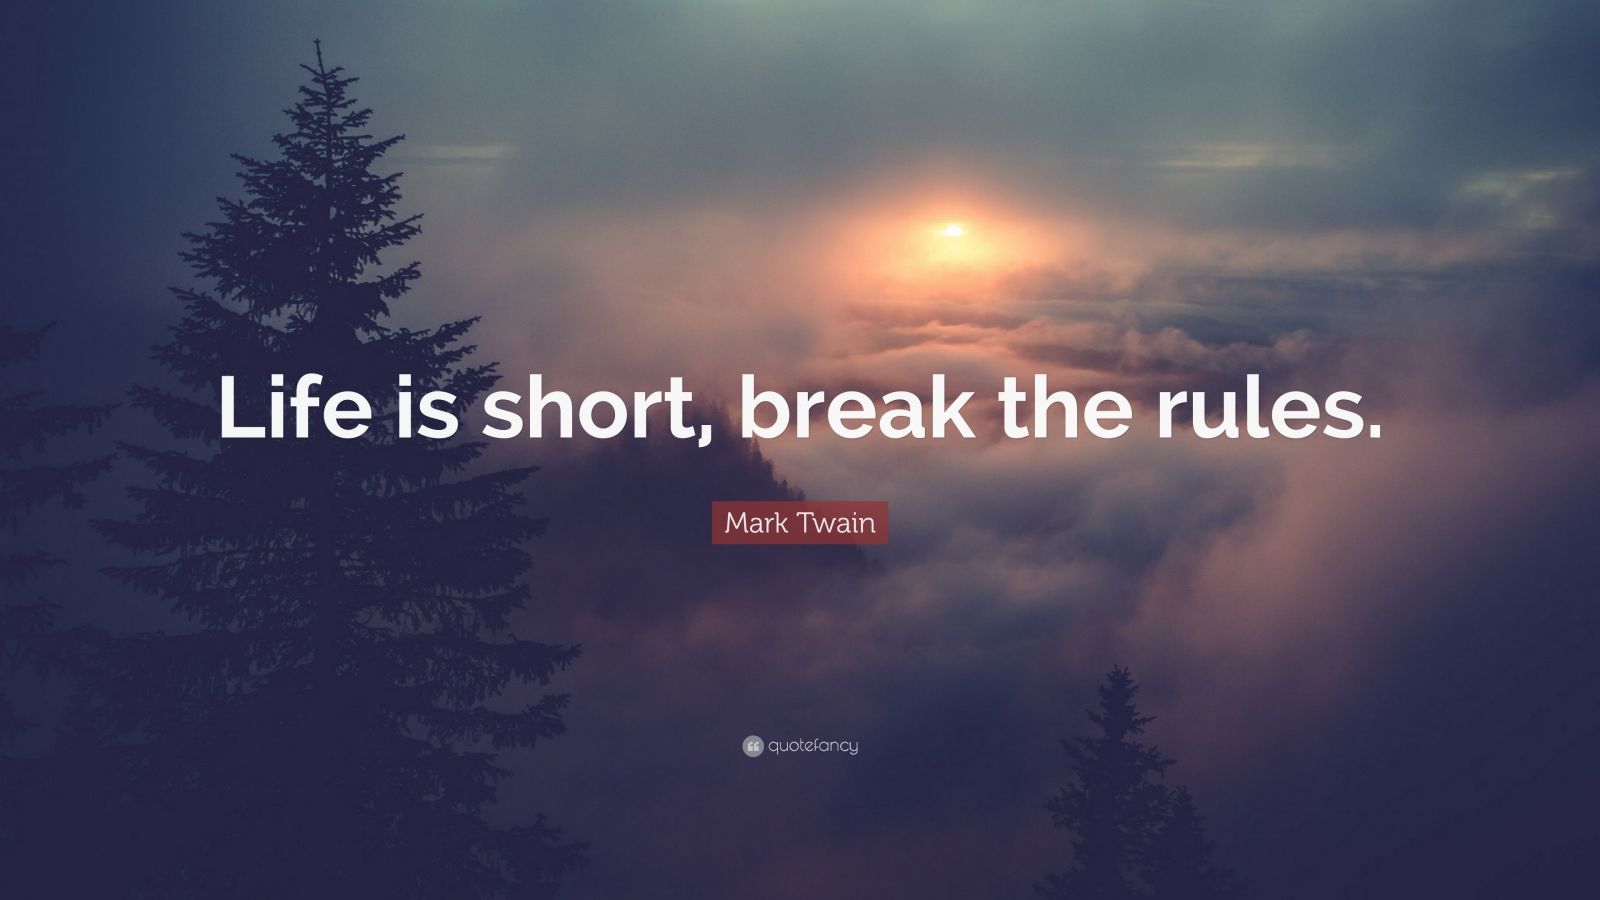 Mark Twain Quote: “Life is short, break the rules.” (12 wallpapers ...